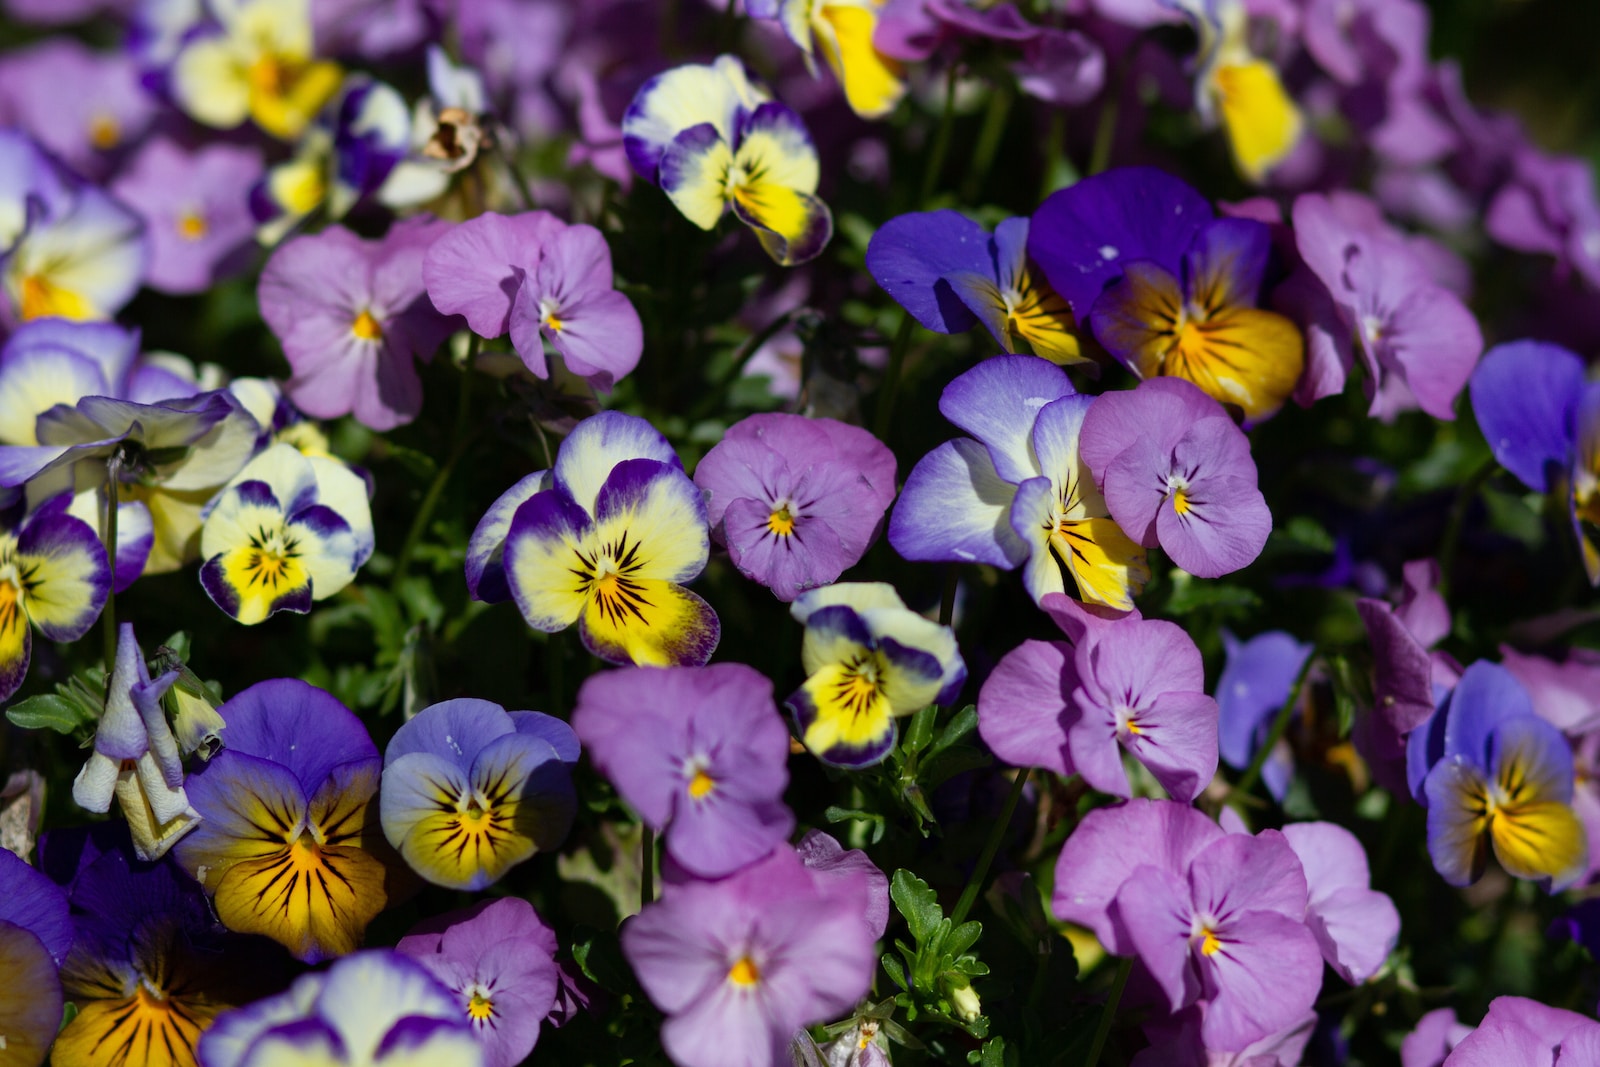 purple and yellow flowers in tilt shift lens